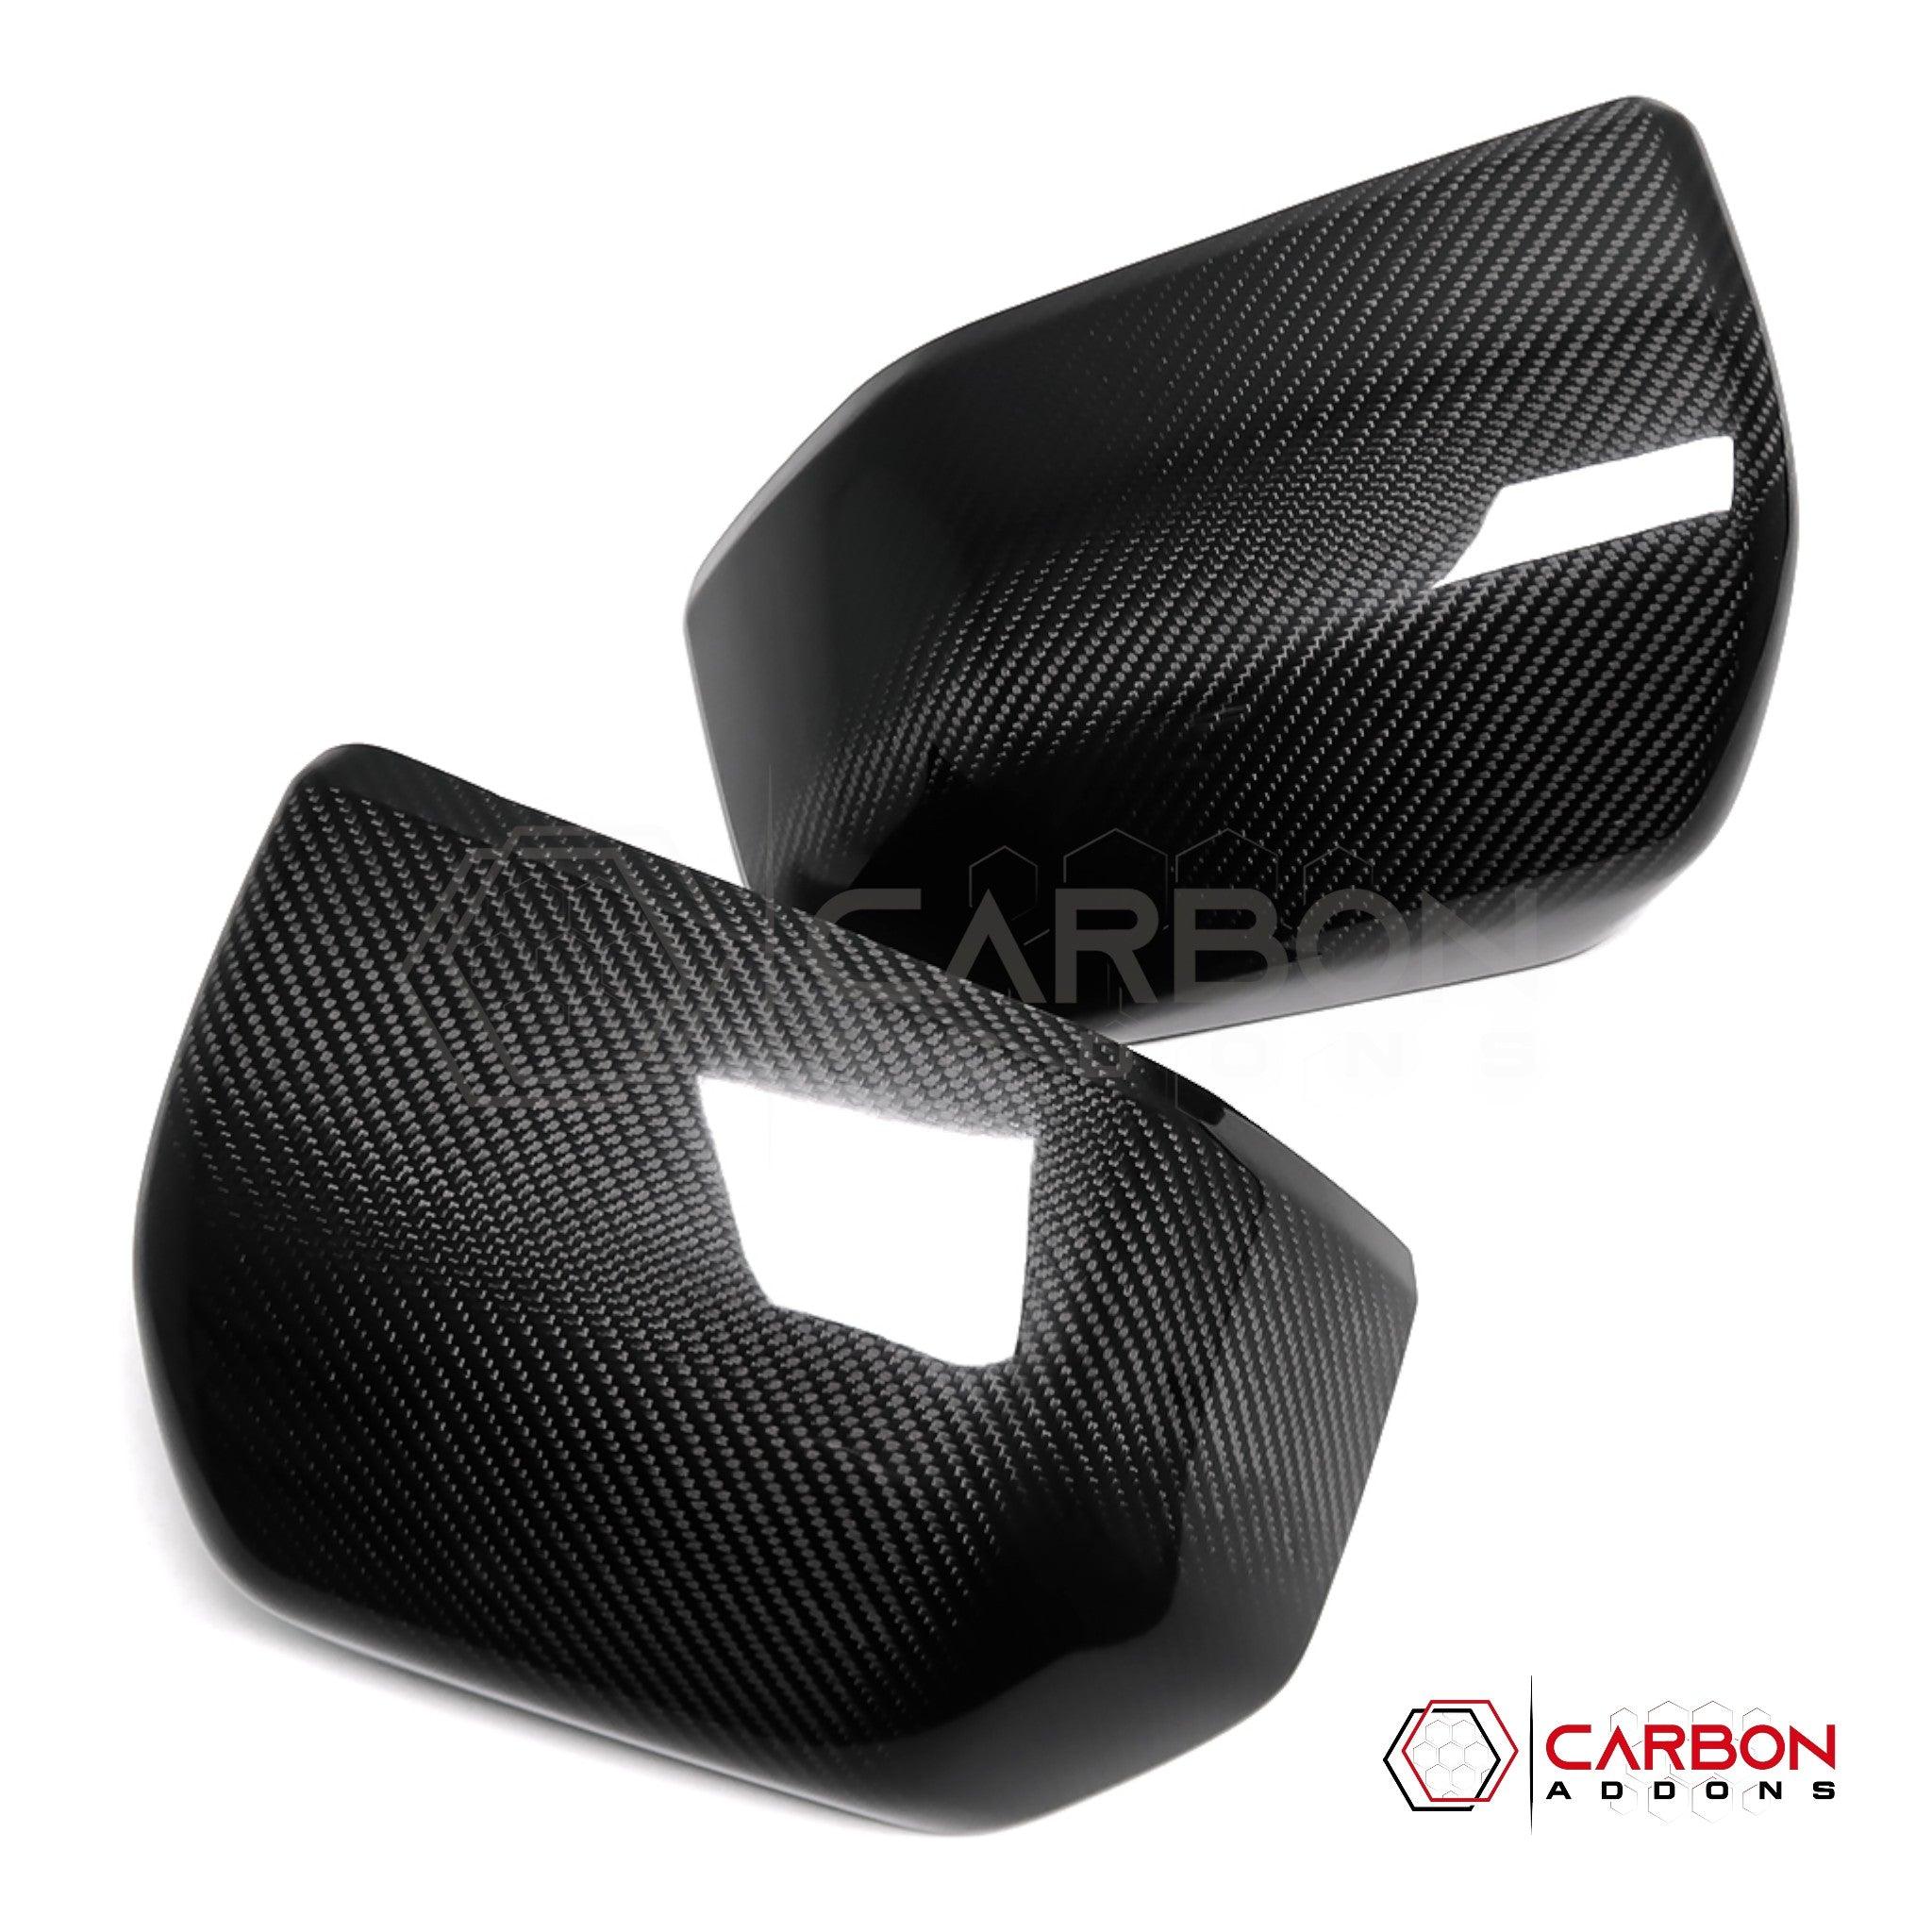 [Coming Soon] Ford F150 2015-2020 Rear View Mirror Hard Carbon Fiber Cover - carbonaddons Carbon Fiber Parts, Accessories, Upgrades, Mods